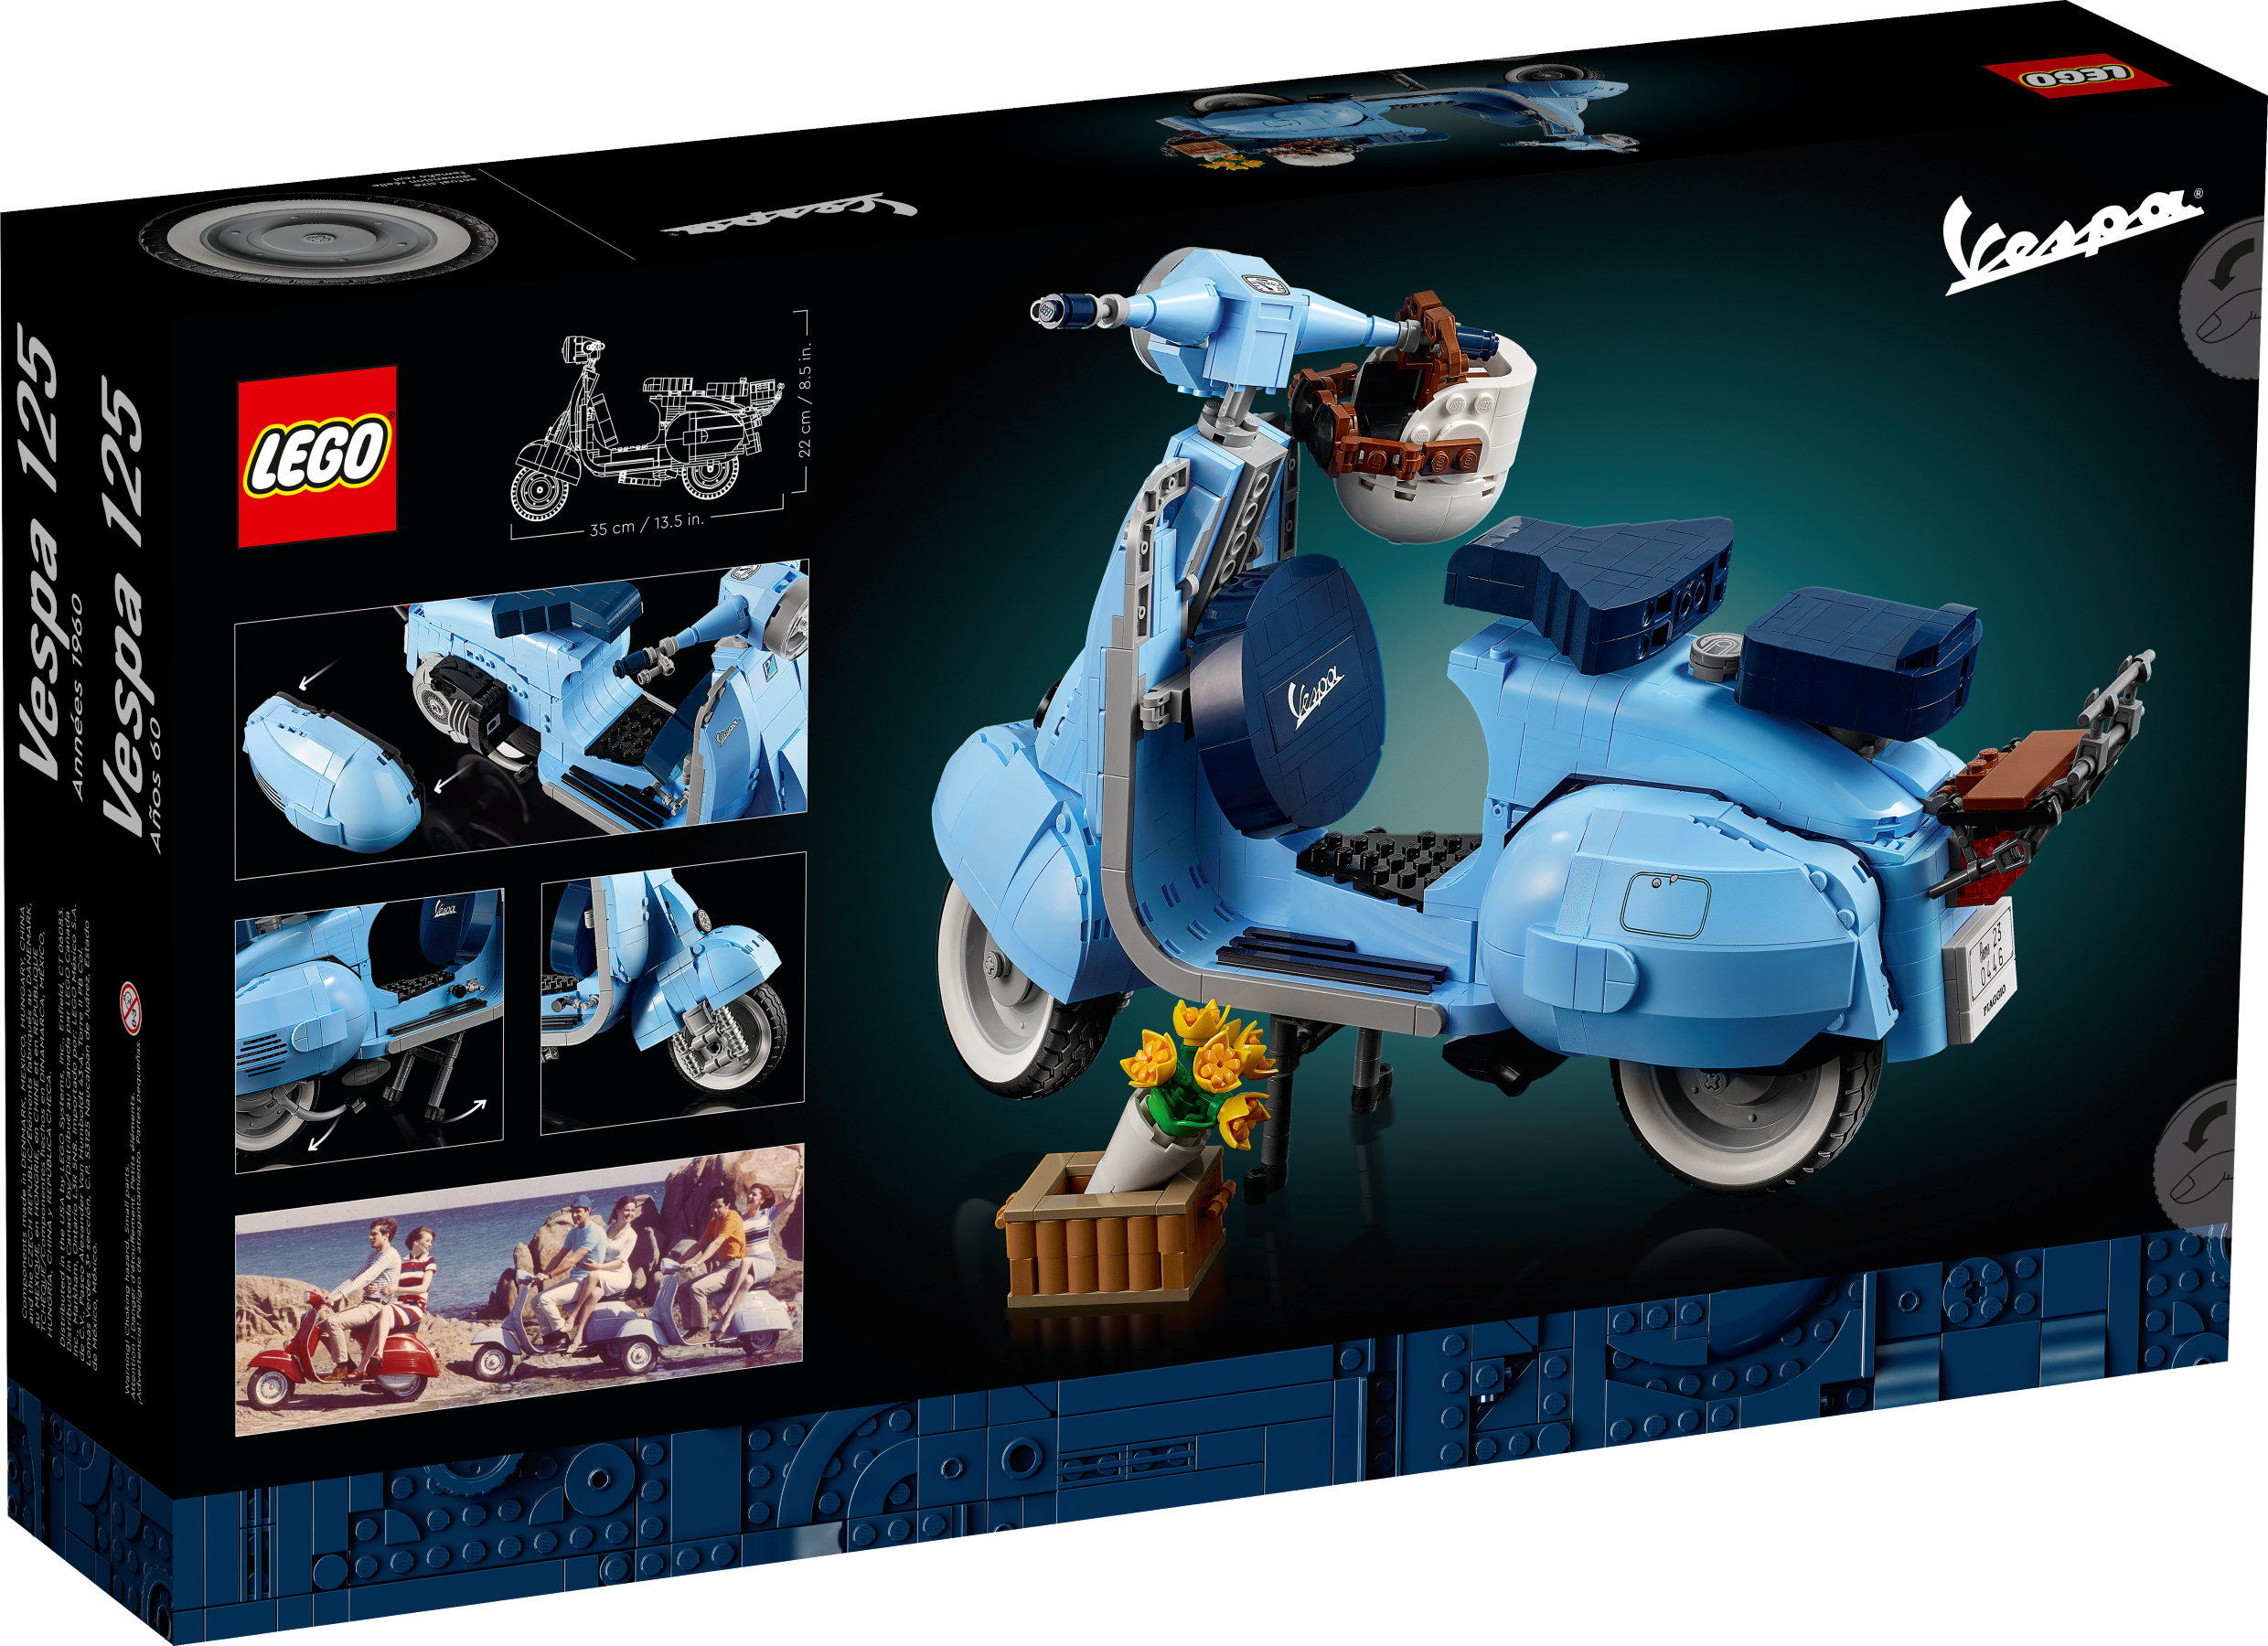  LEGO Icons Vespa 125 Scooter Model Building Kit 10298, Vintage  Italian Iconic Model Moped, Display Home Décor Set for Adults, Relaxing  Creative Hobbies, Gift Idea : Toys & Games